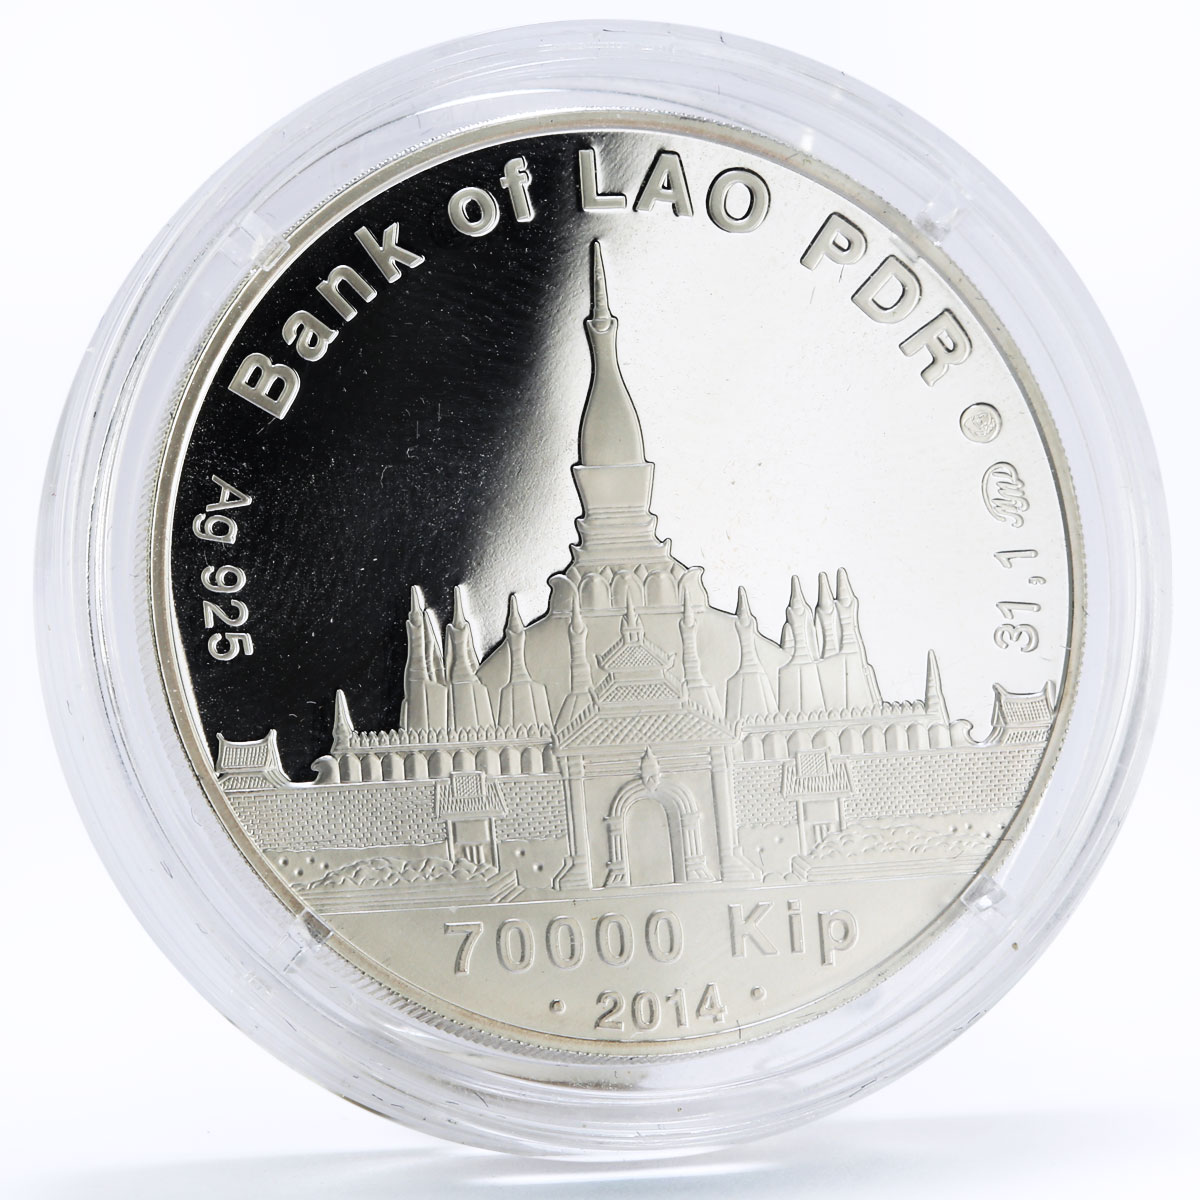 Laos 70000 kip Happy Holiday series Butterfly hologram silver coin 2014